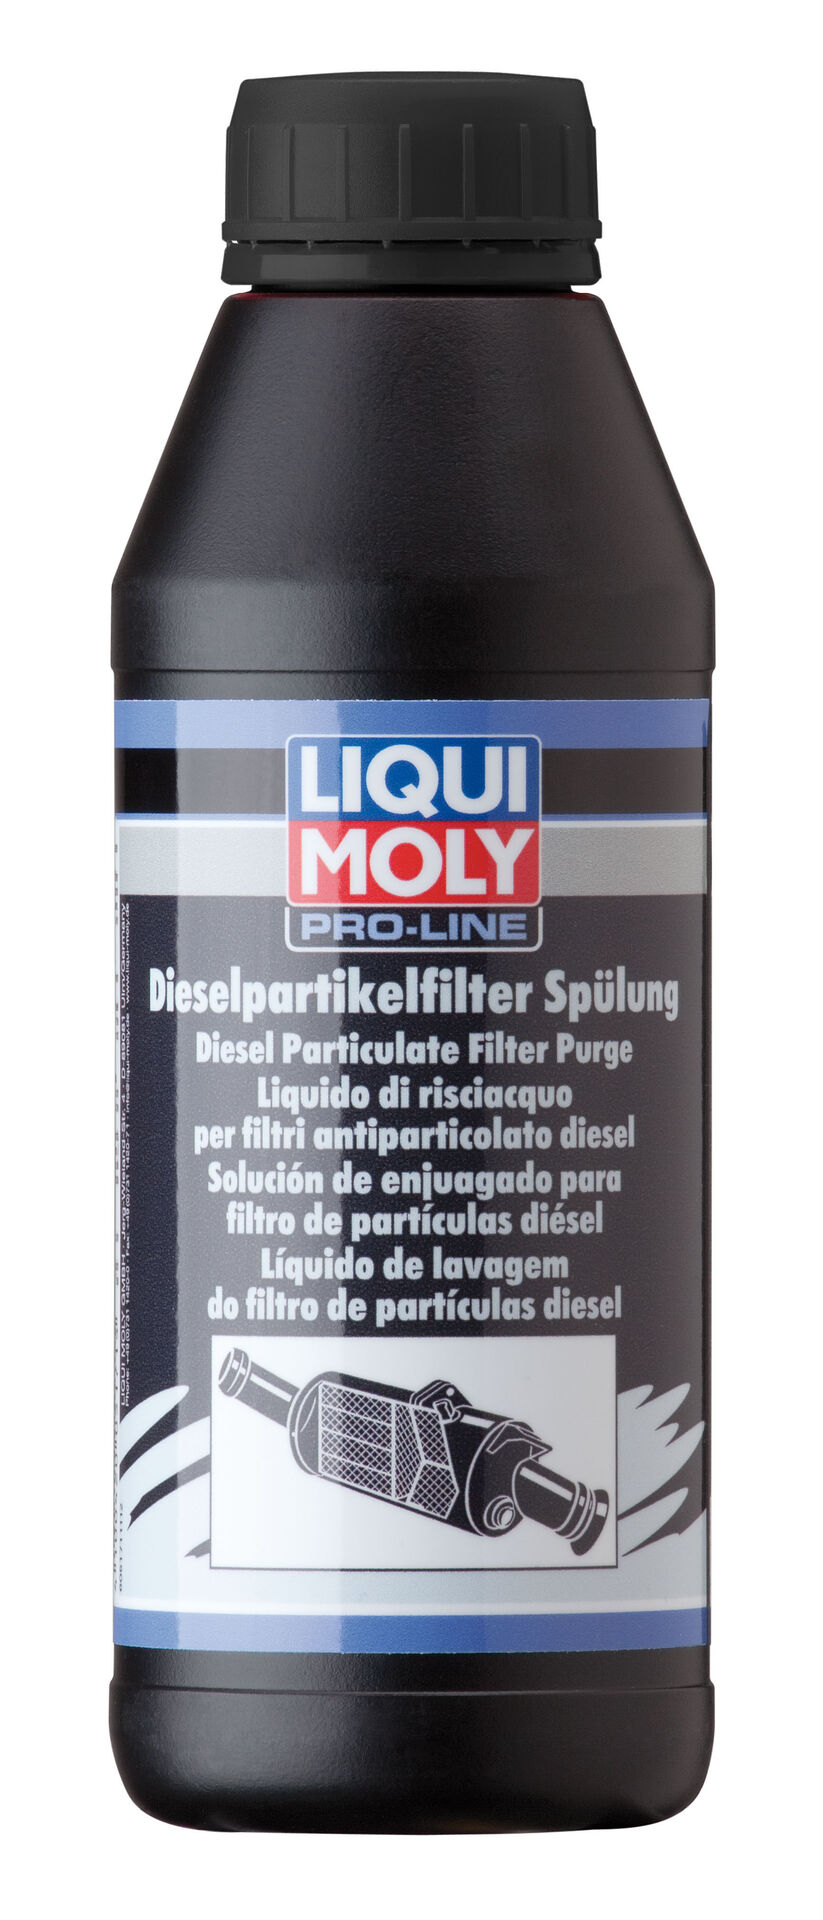 Diesel Additives Archives - Liqui Moly